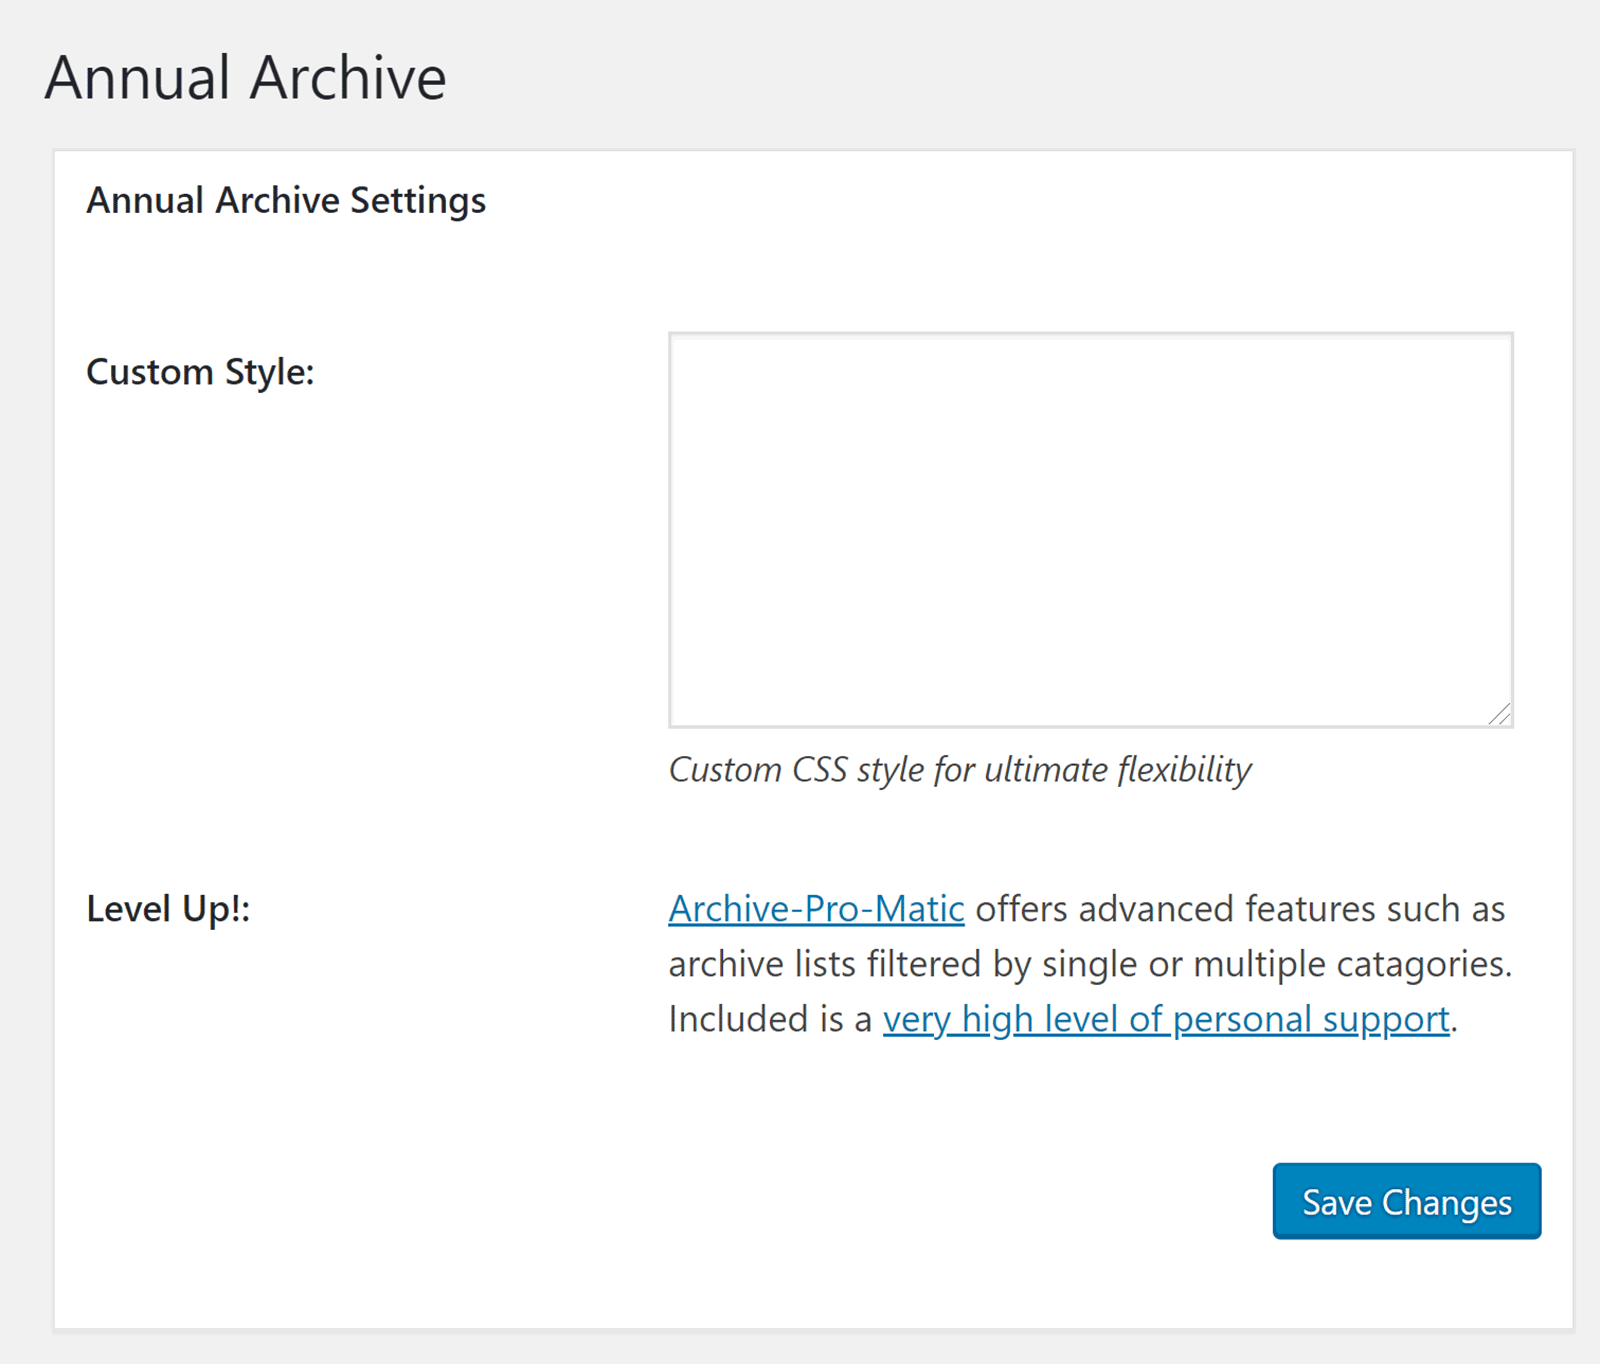 Annual Archive Settings